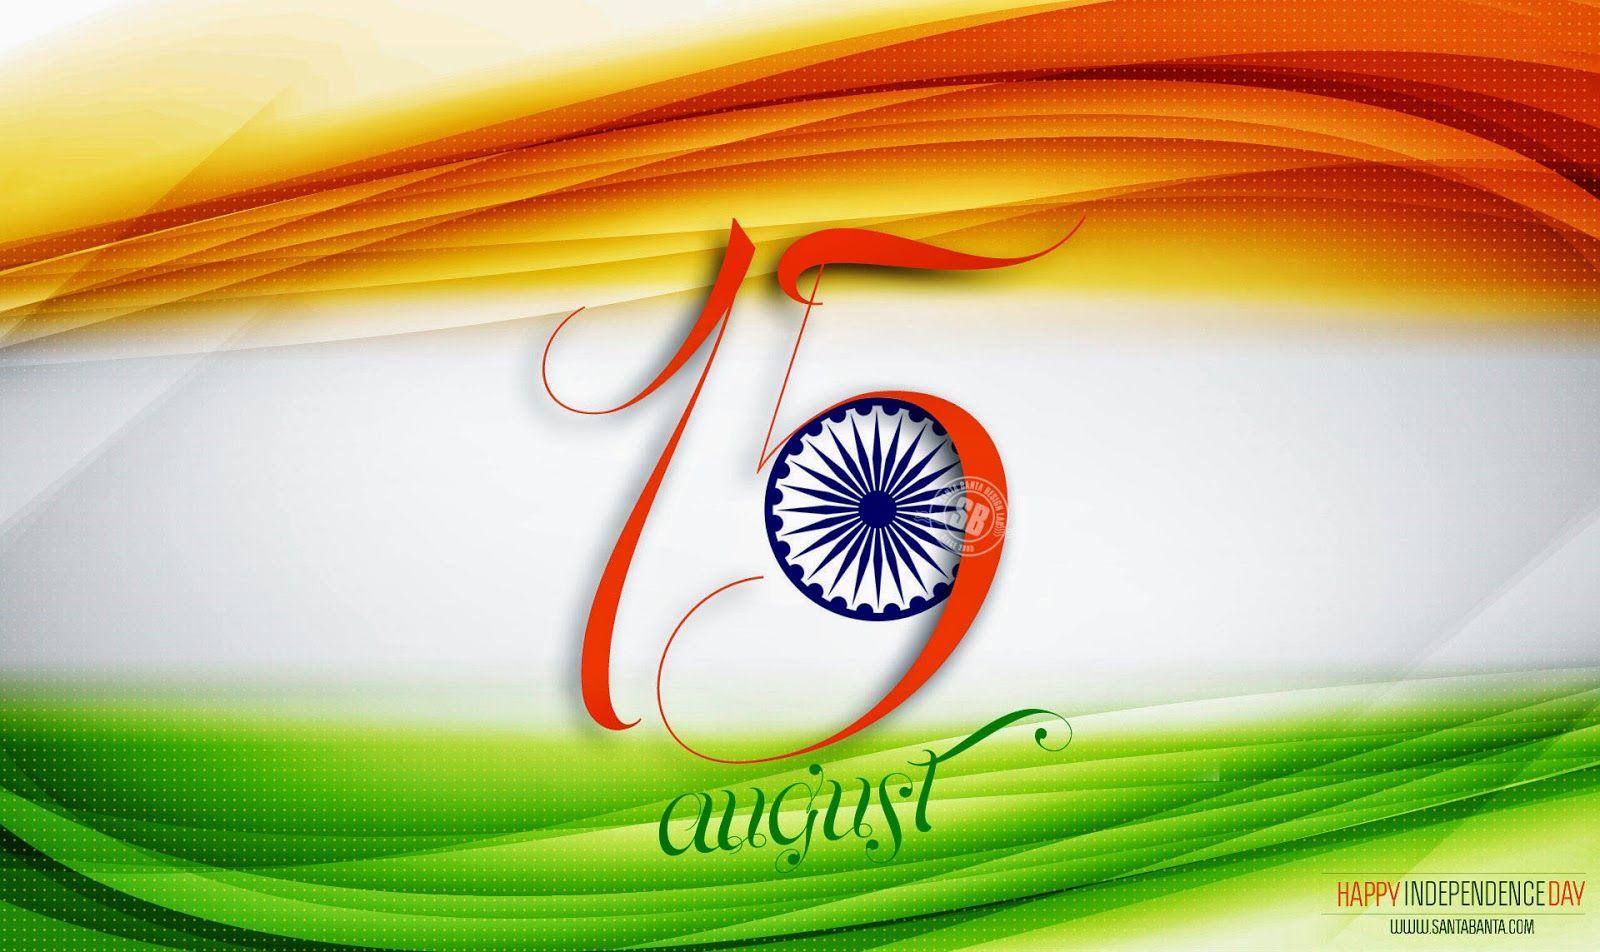 Indian Independence Day Wallpaper